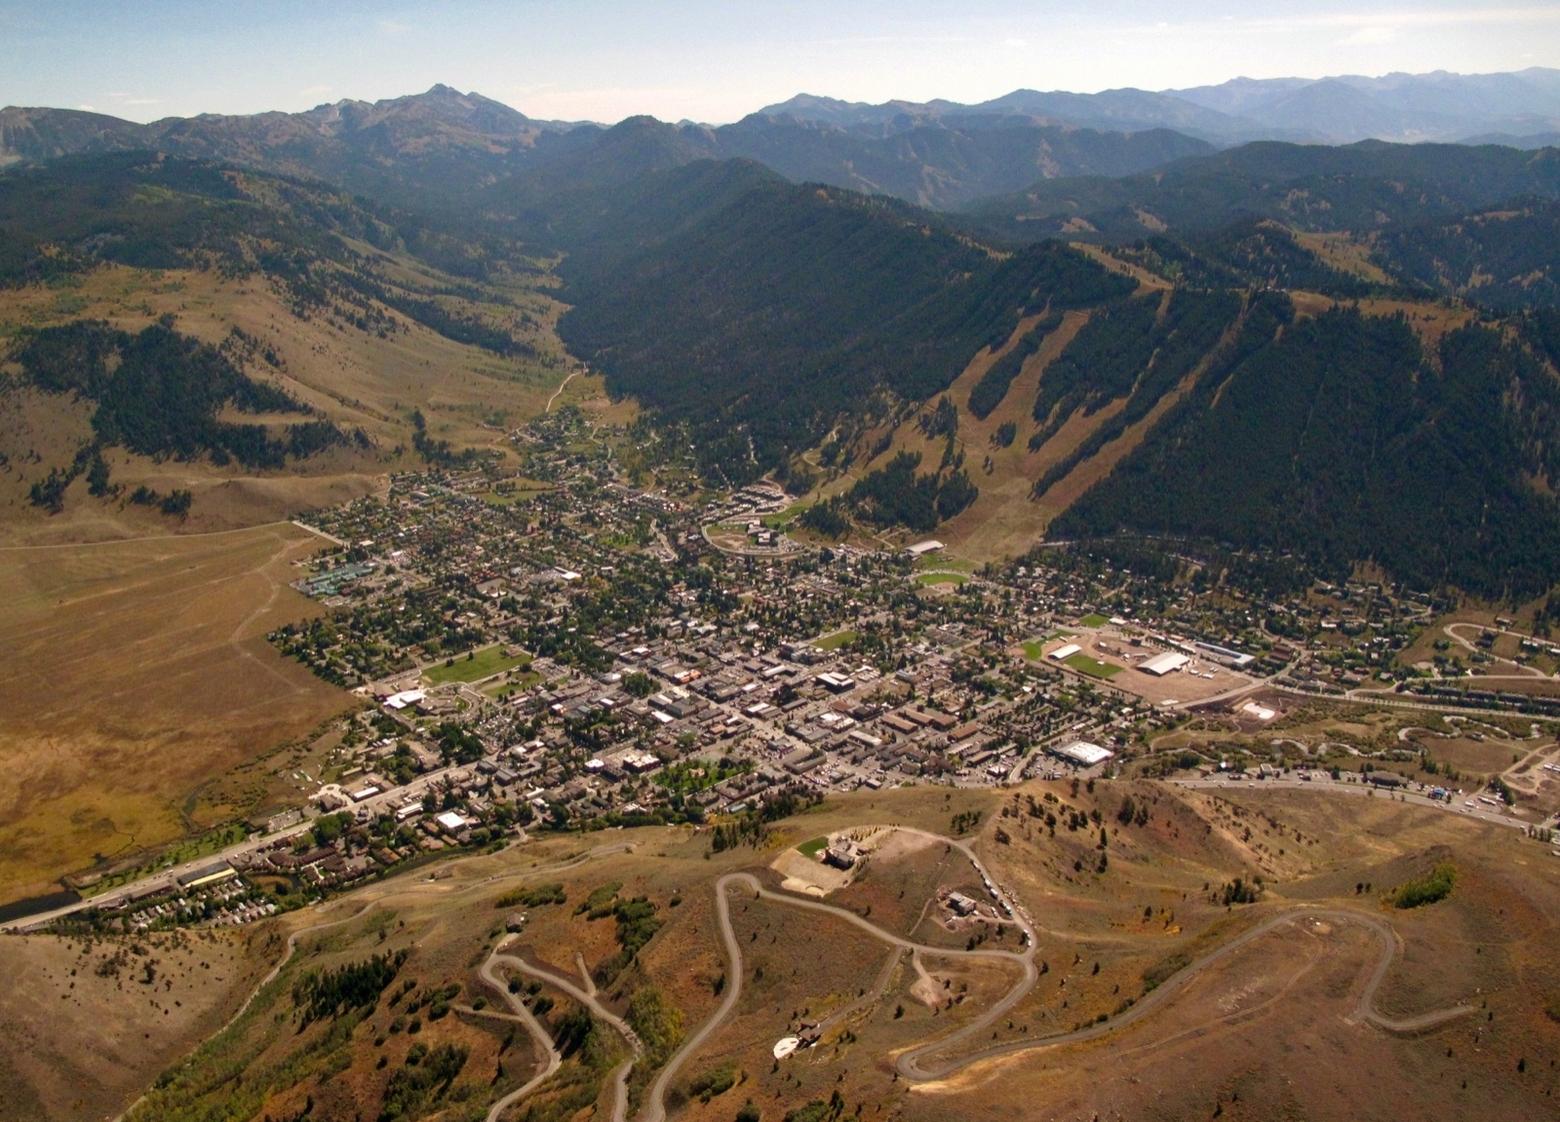 The town of Jackson, hub of Teton County, Wyoming and a busy hive of human activity, may look quaint from the sky.  However, the tentacles of its tourist-driven economy extend in every direction. Even though 97 percent of Teton County is comprised of public land, intense development pressure on private land has exerted direct impacts on wildlife and community character. A more insidious force is outdoor recreation putting more intense pressure on public lands. While the consequences of that have left many in denial, there is rising social angst over whether the wild essence of the valley can survive, observers say.  Photo courtesy EcoFlight (http://ecoflight.org)